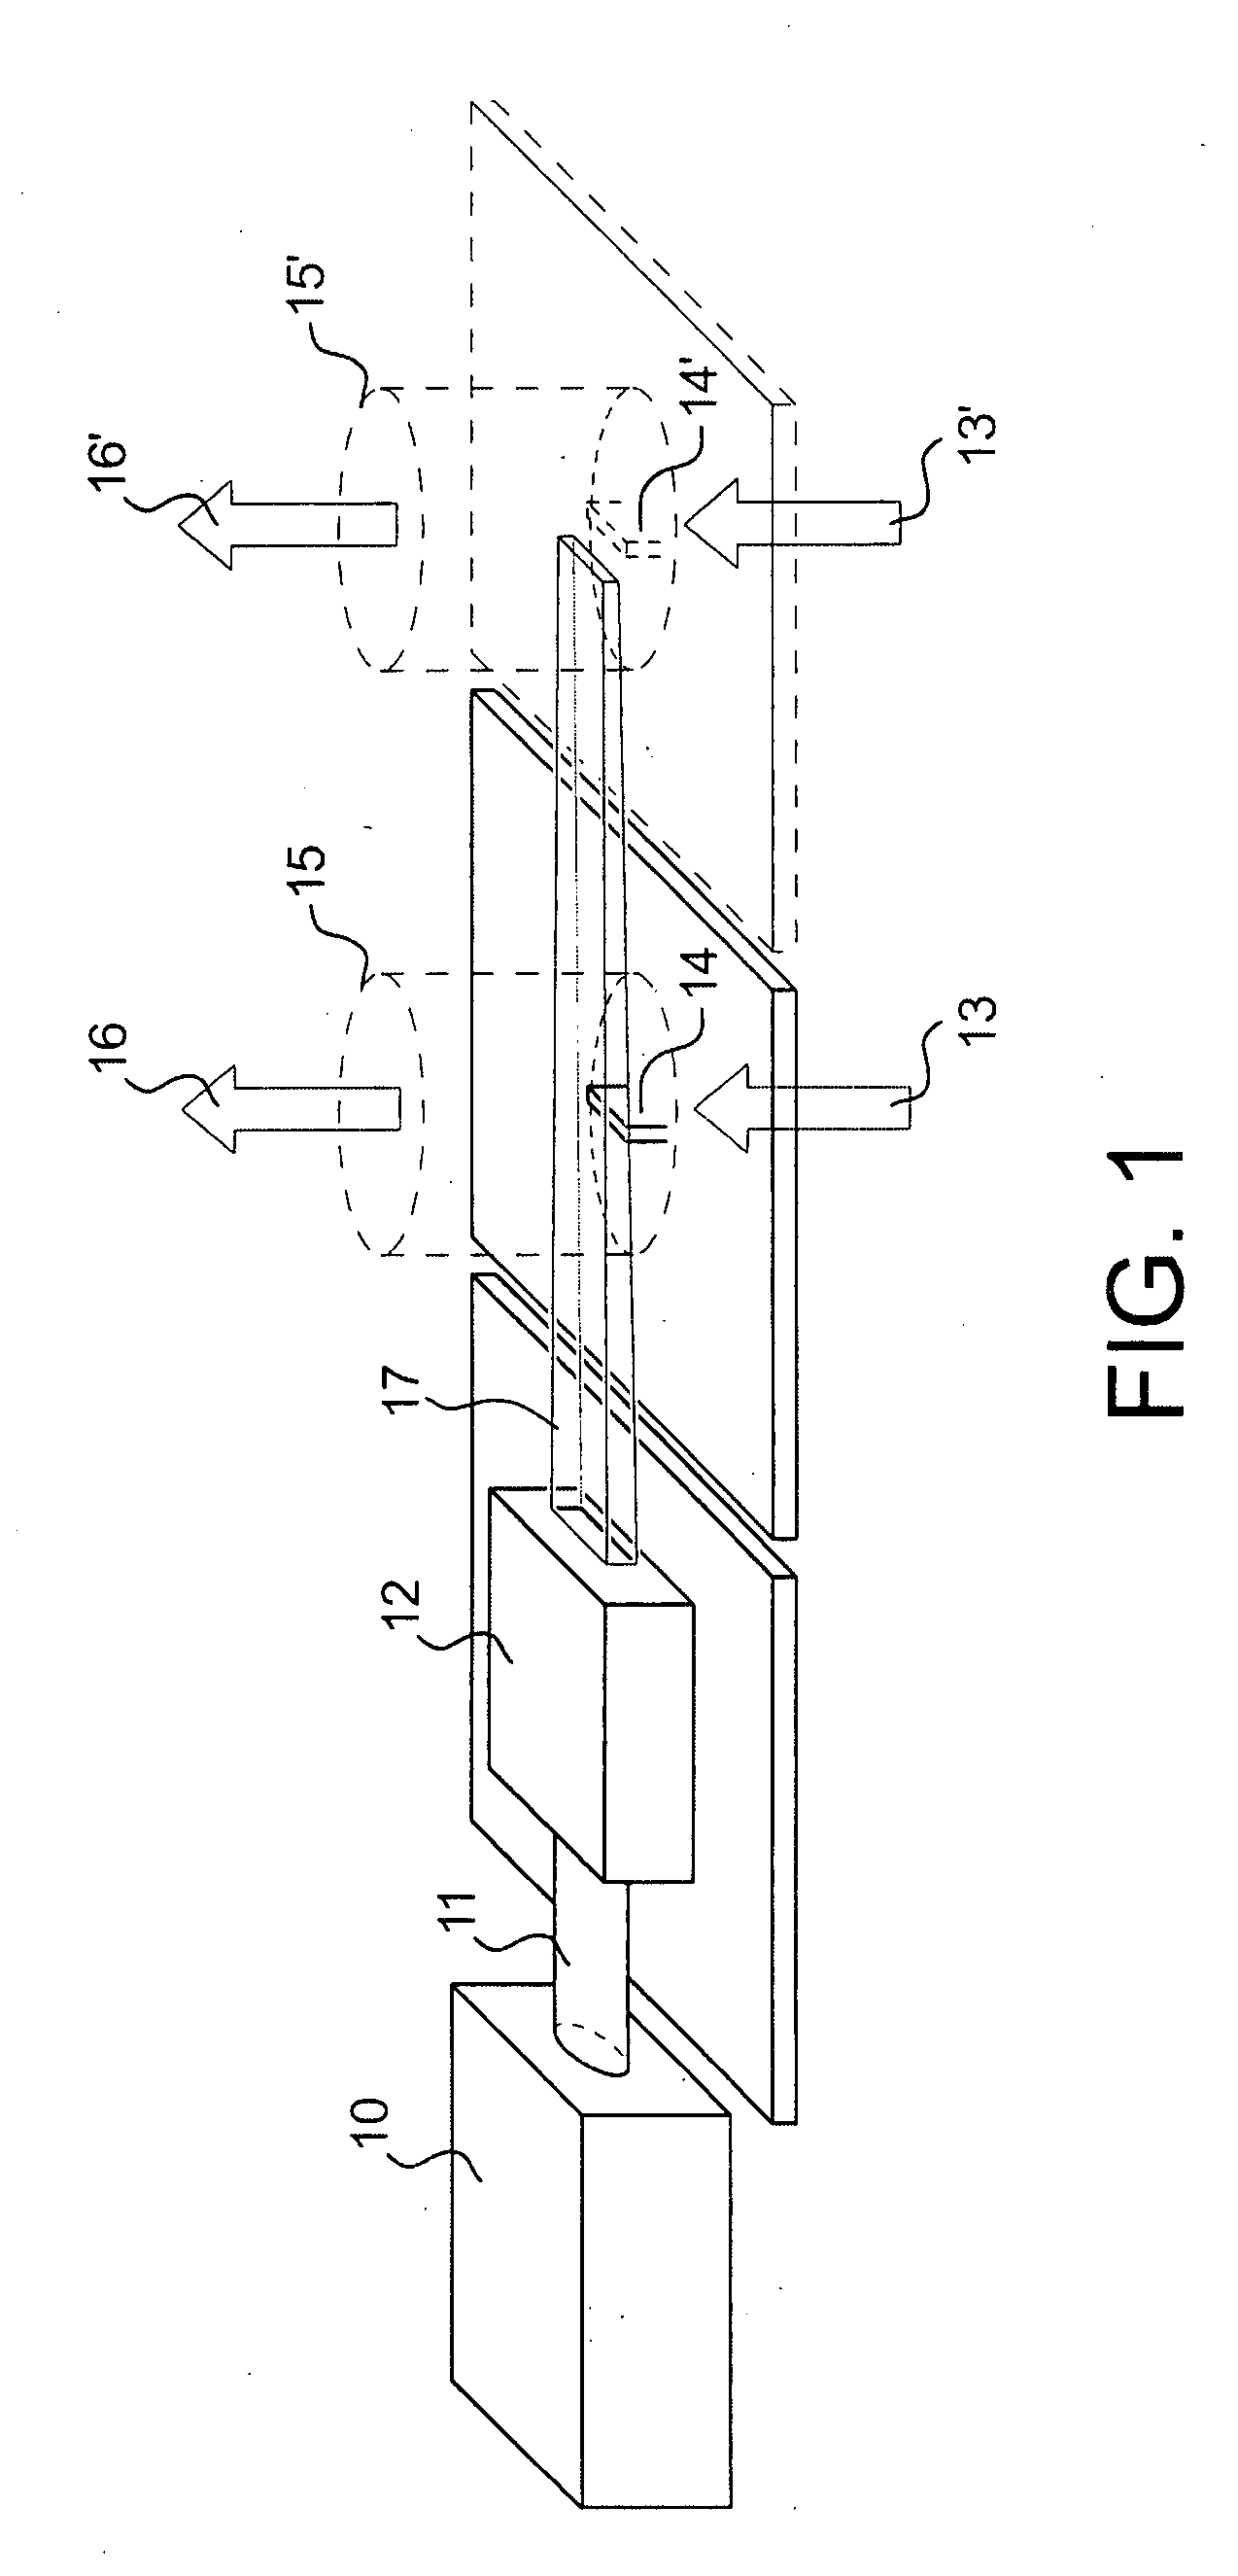 System and Process for Production of Nanometric or Sub-Micrometric Powders in Continuous Flus Under the Action of a Pyrolysis Laser